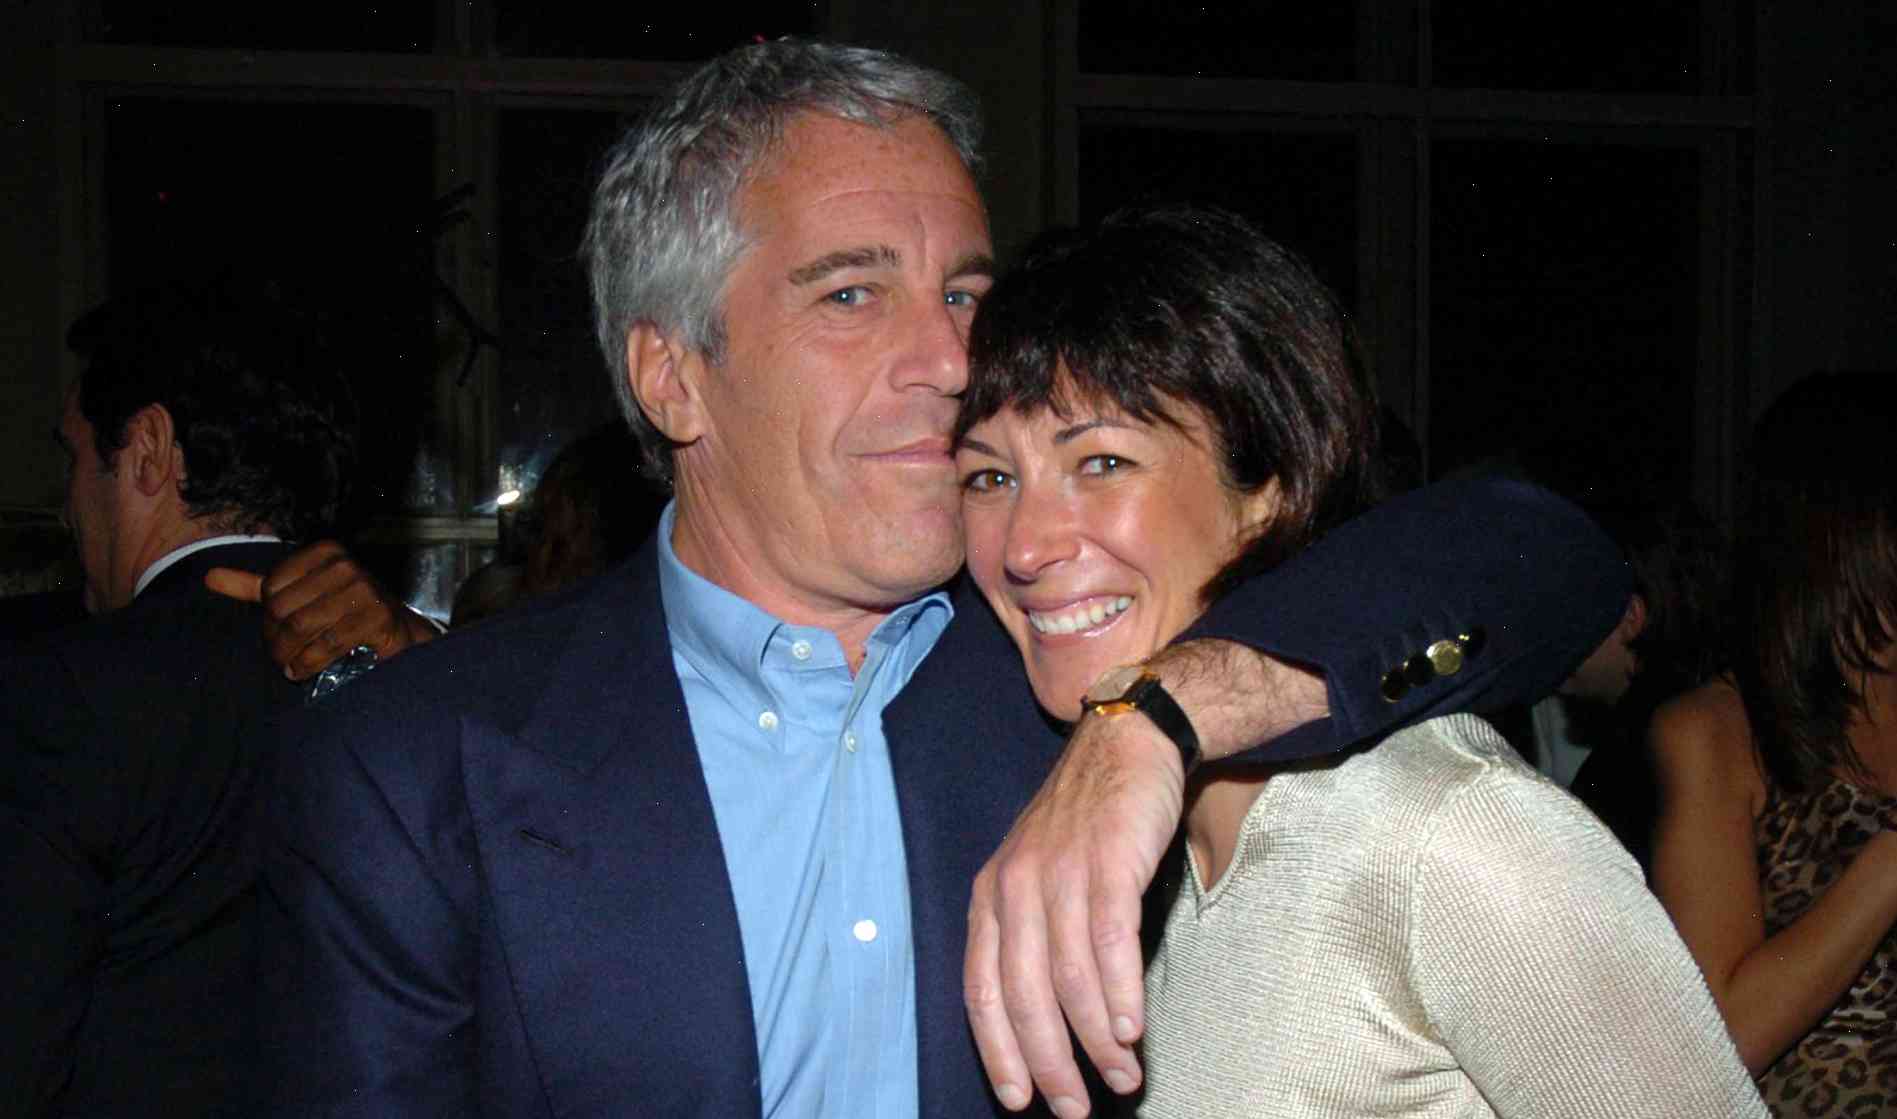 Victims and prosecutors see Ghislaine Maxwell as 'center' of Epstein's scheme ahead of trial